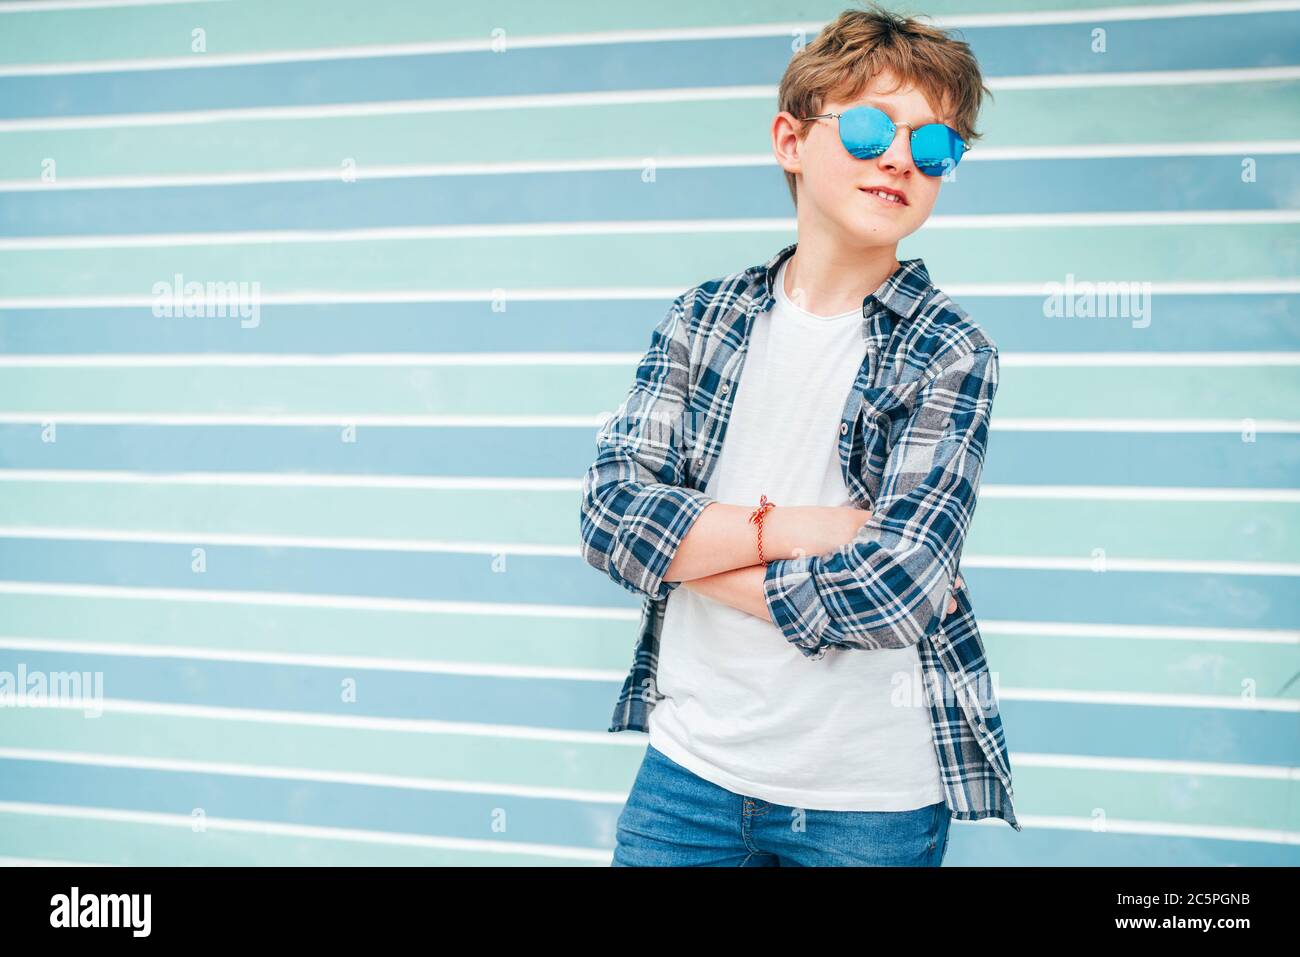 Fashion portrait of caucasian blonde hair 12 year old teenager boy dressed t-shirt and checkered shirt in blue sunglasses posing on turquoise blue bac Stock Photo